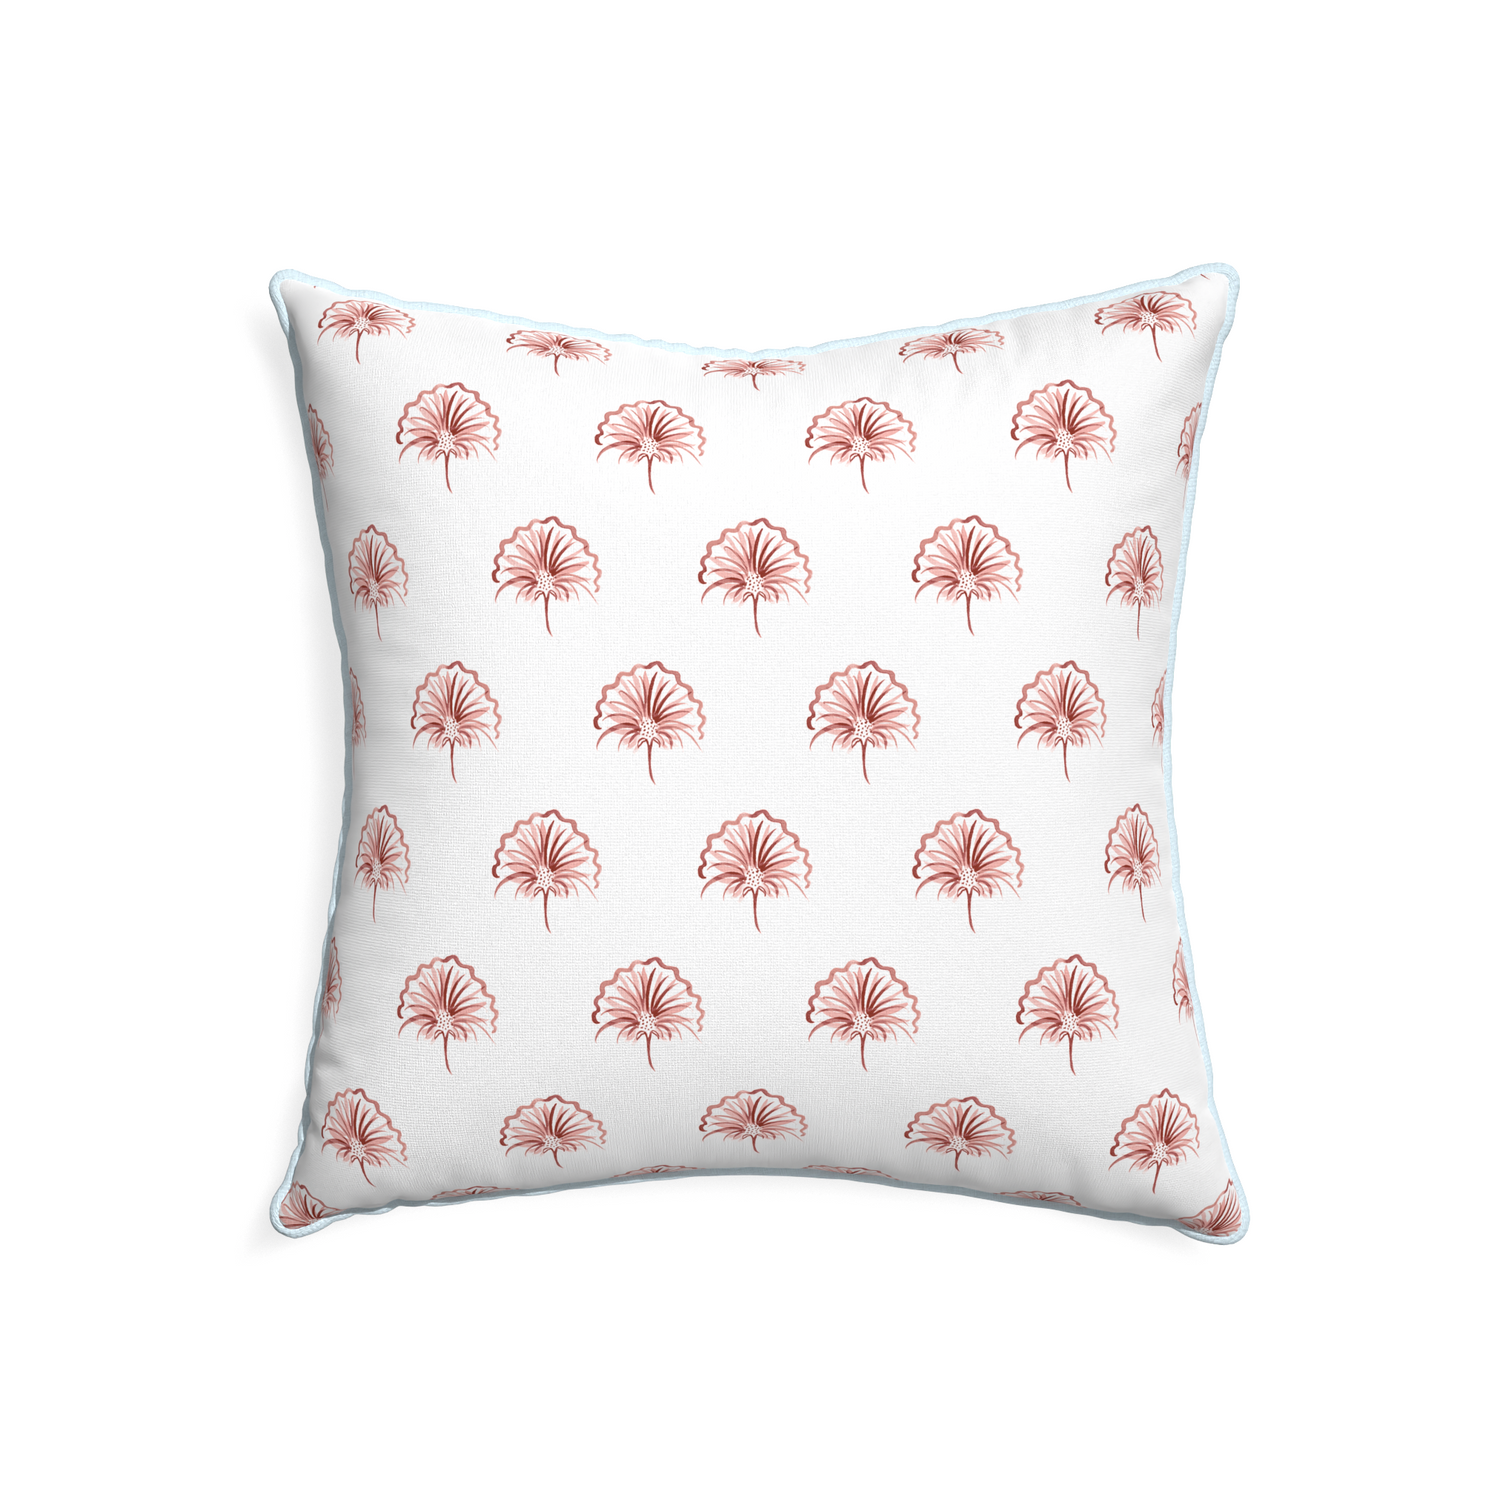 22-square penelope rose custom floral pinkpillow with powder piping on white background